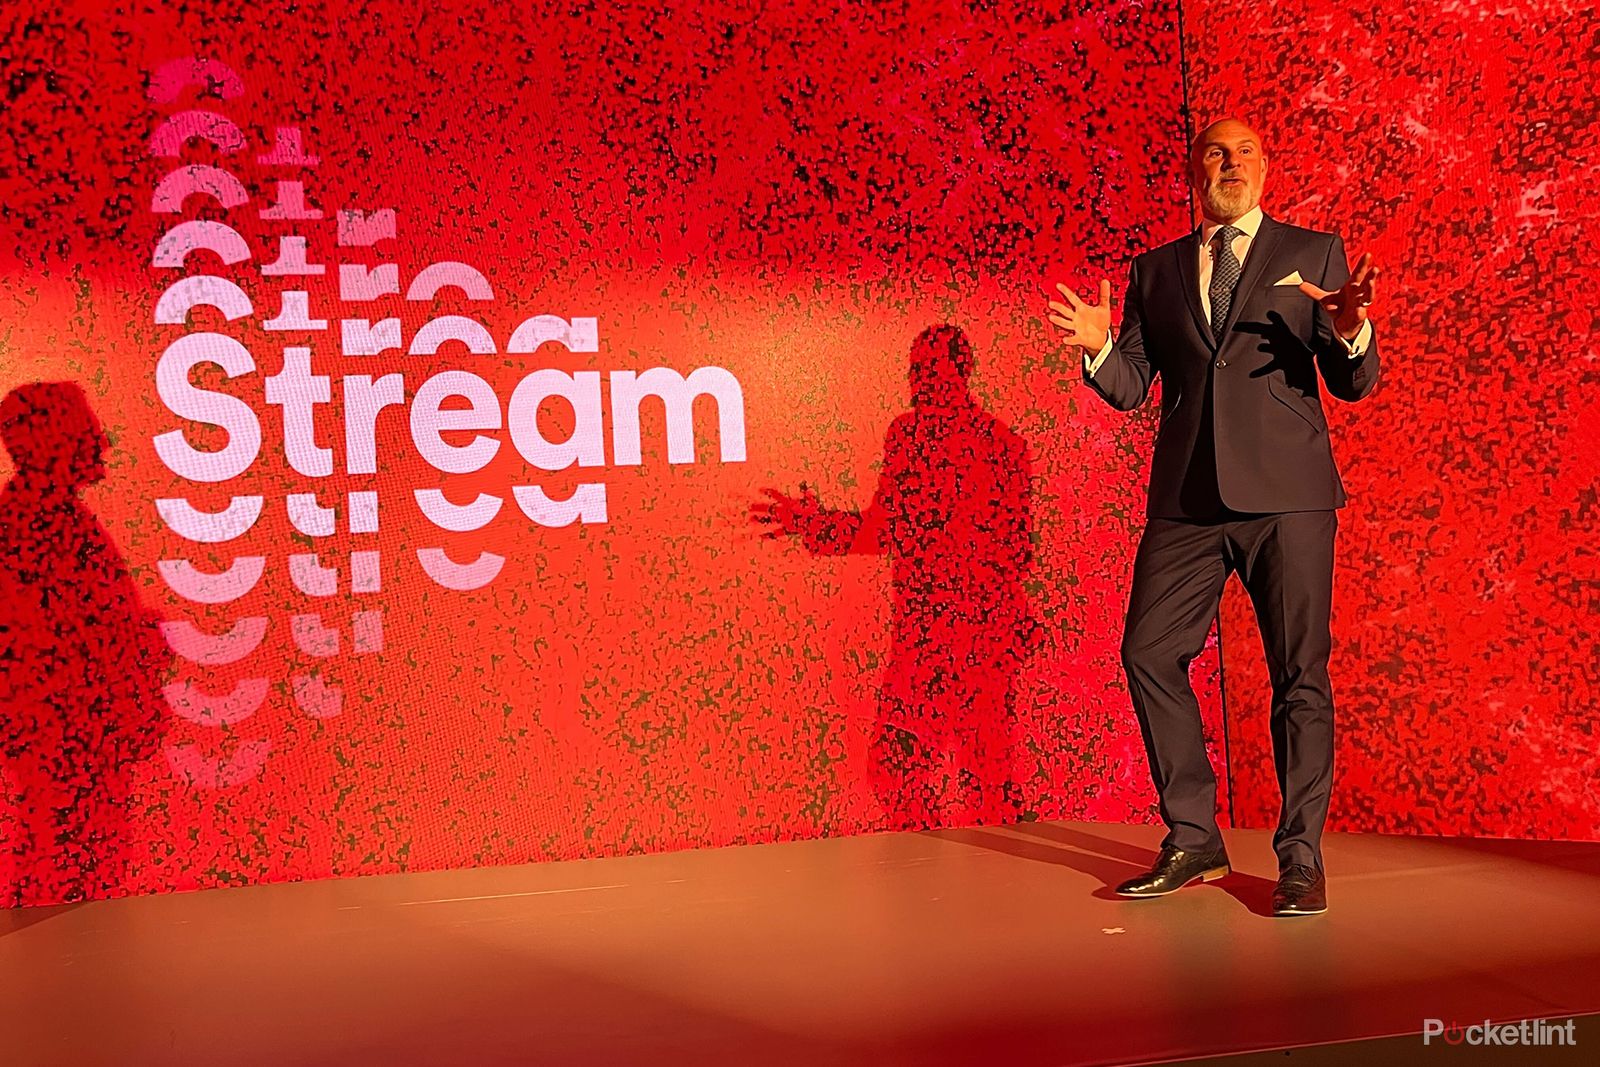 Stream is the new all-in-one internet TV service from Virgin Media photo 2